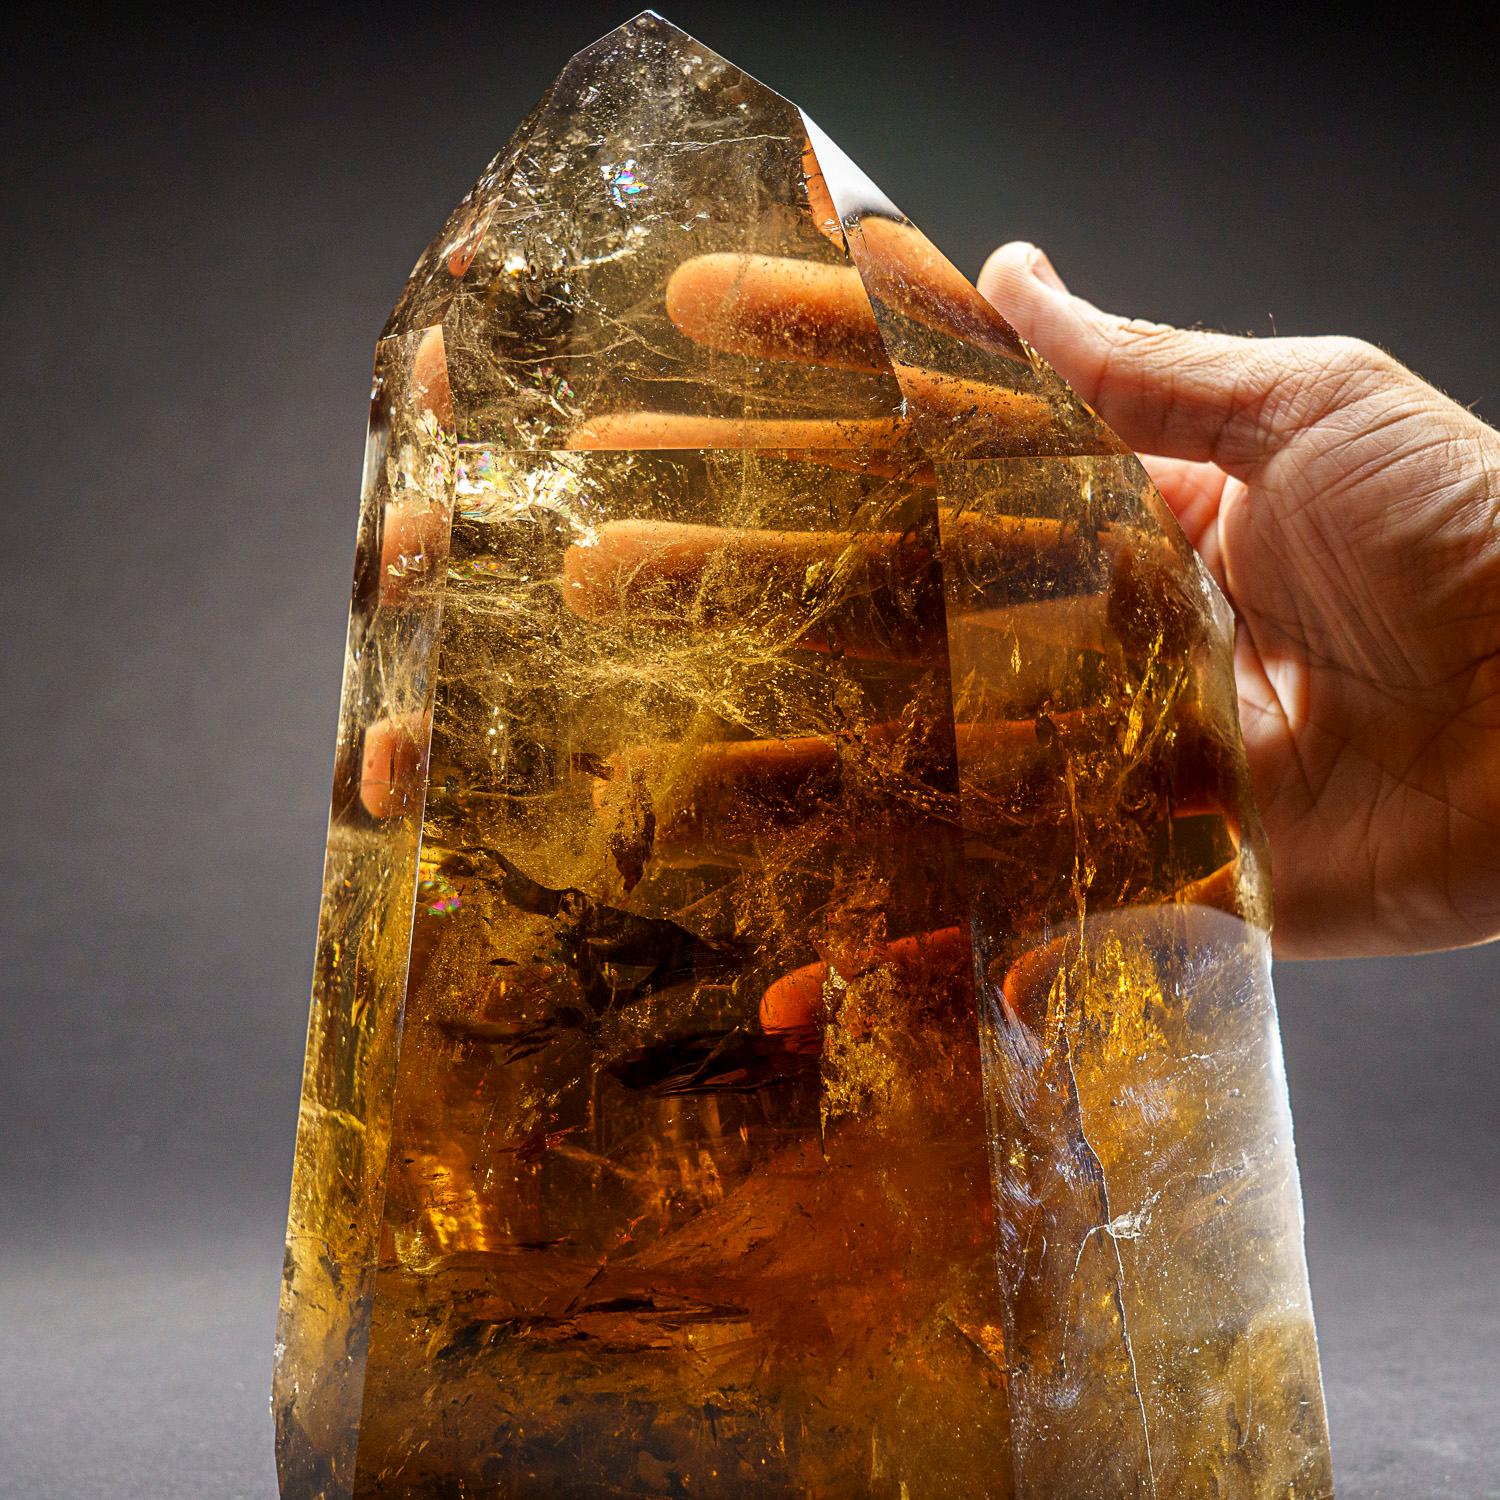 Museum-quality, large crystal of transparent Smoky Quartz point with perfectly terminated face. This world-class crystal point is internally flawless, with top luster and excellent natural smoky yellow color.

Smokey Quartz works with all of the